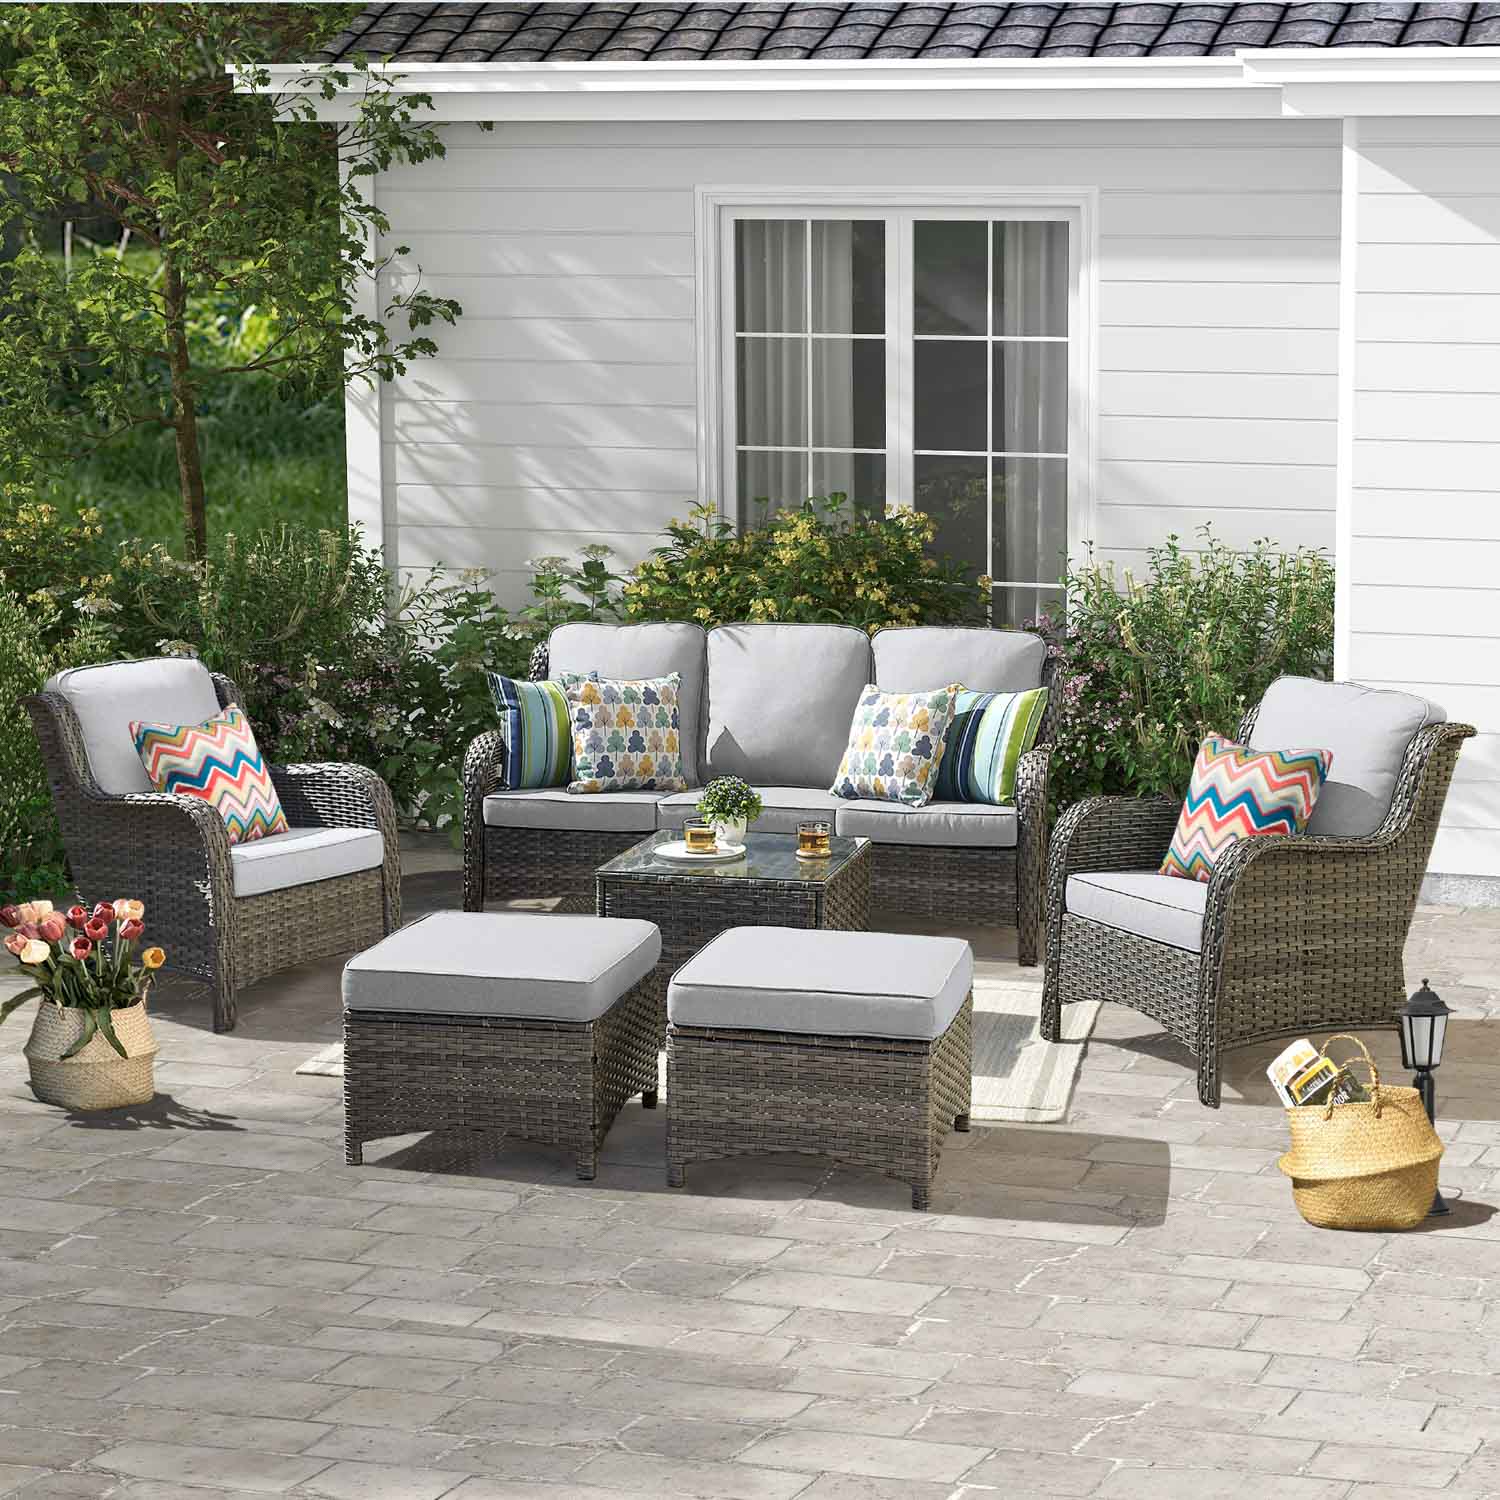 Ovios Patio Furniture Set 6-Piece with Table Kenard Curved Handrest